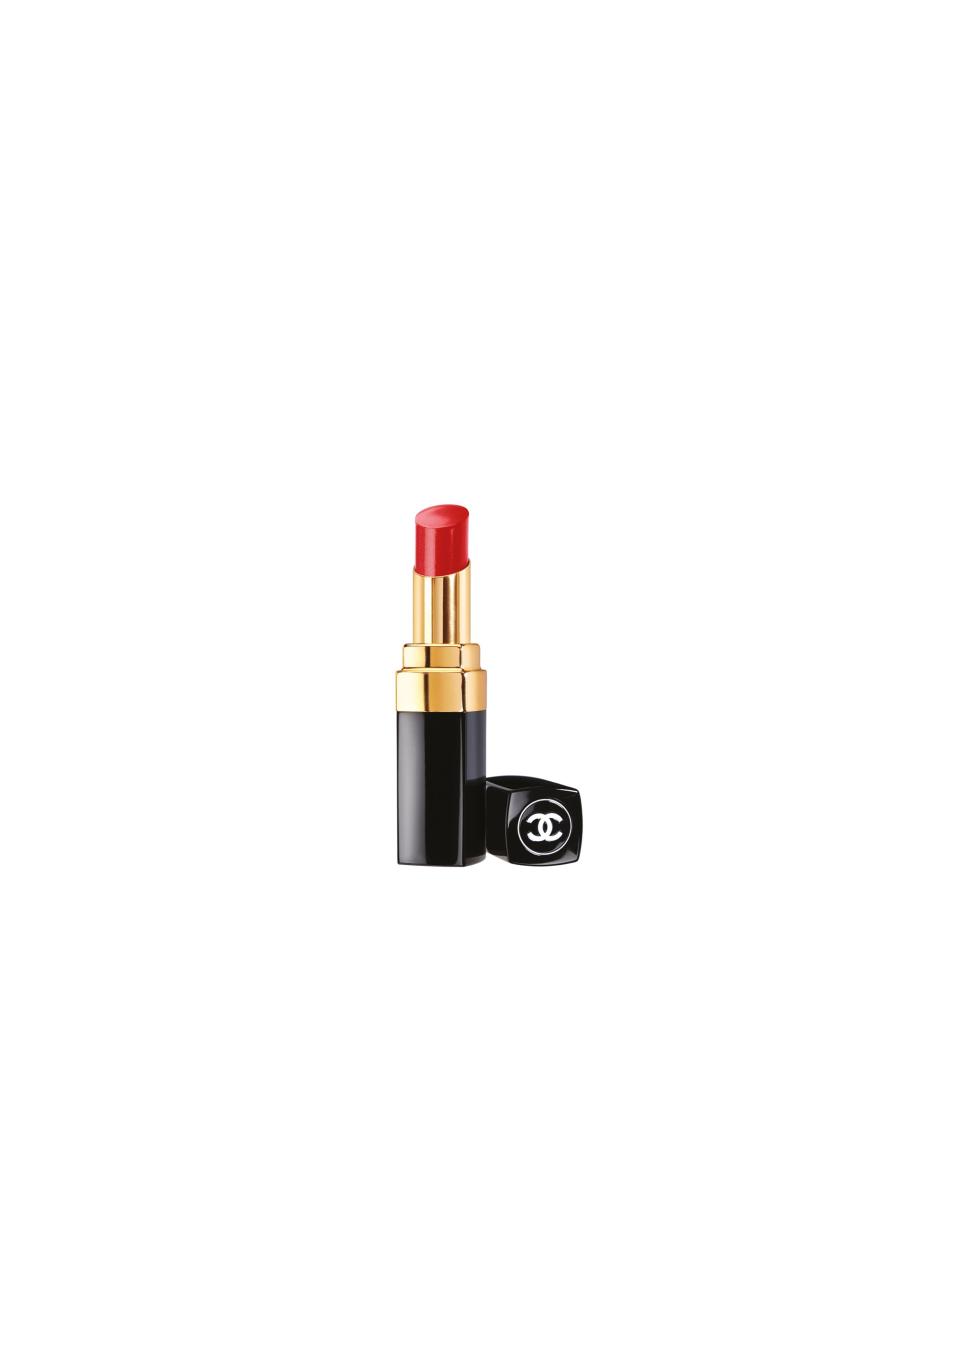 Chanel Rouge Coco Shine in ‘Dialogue‘ (£31)